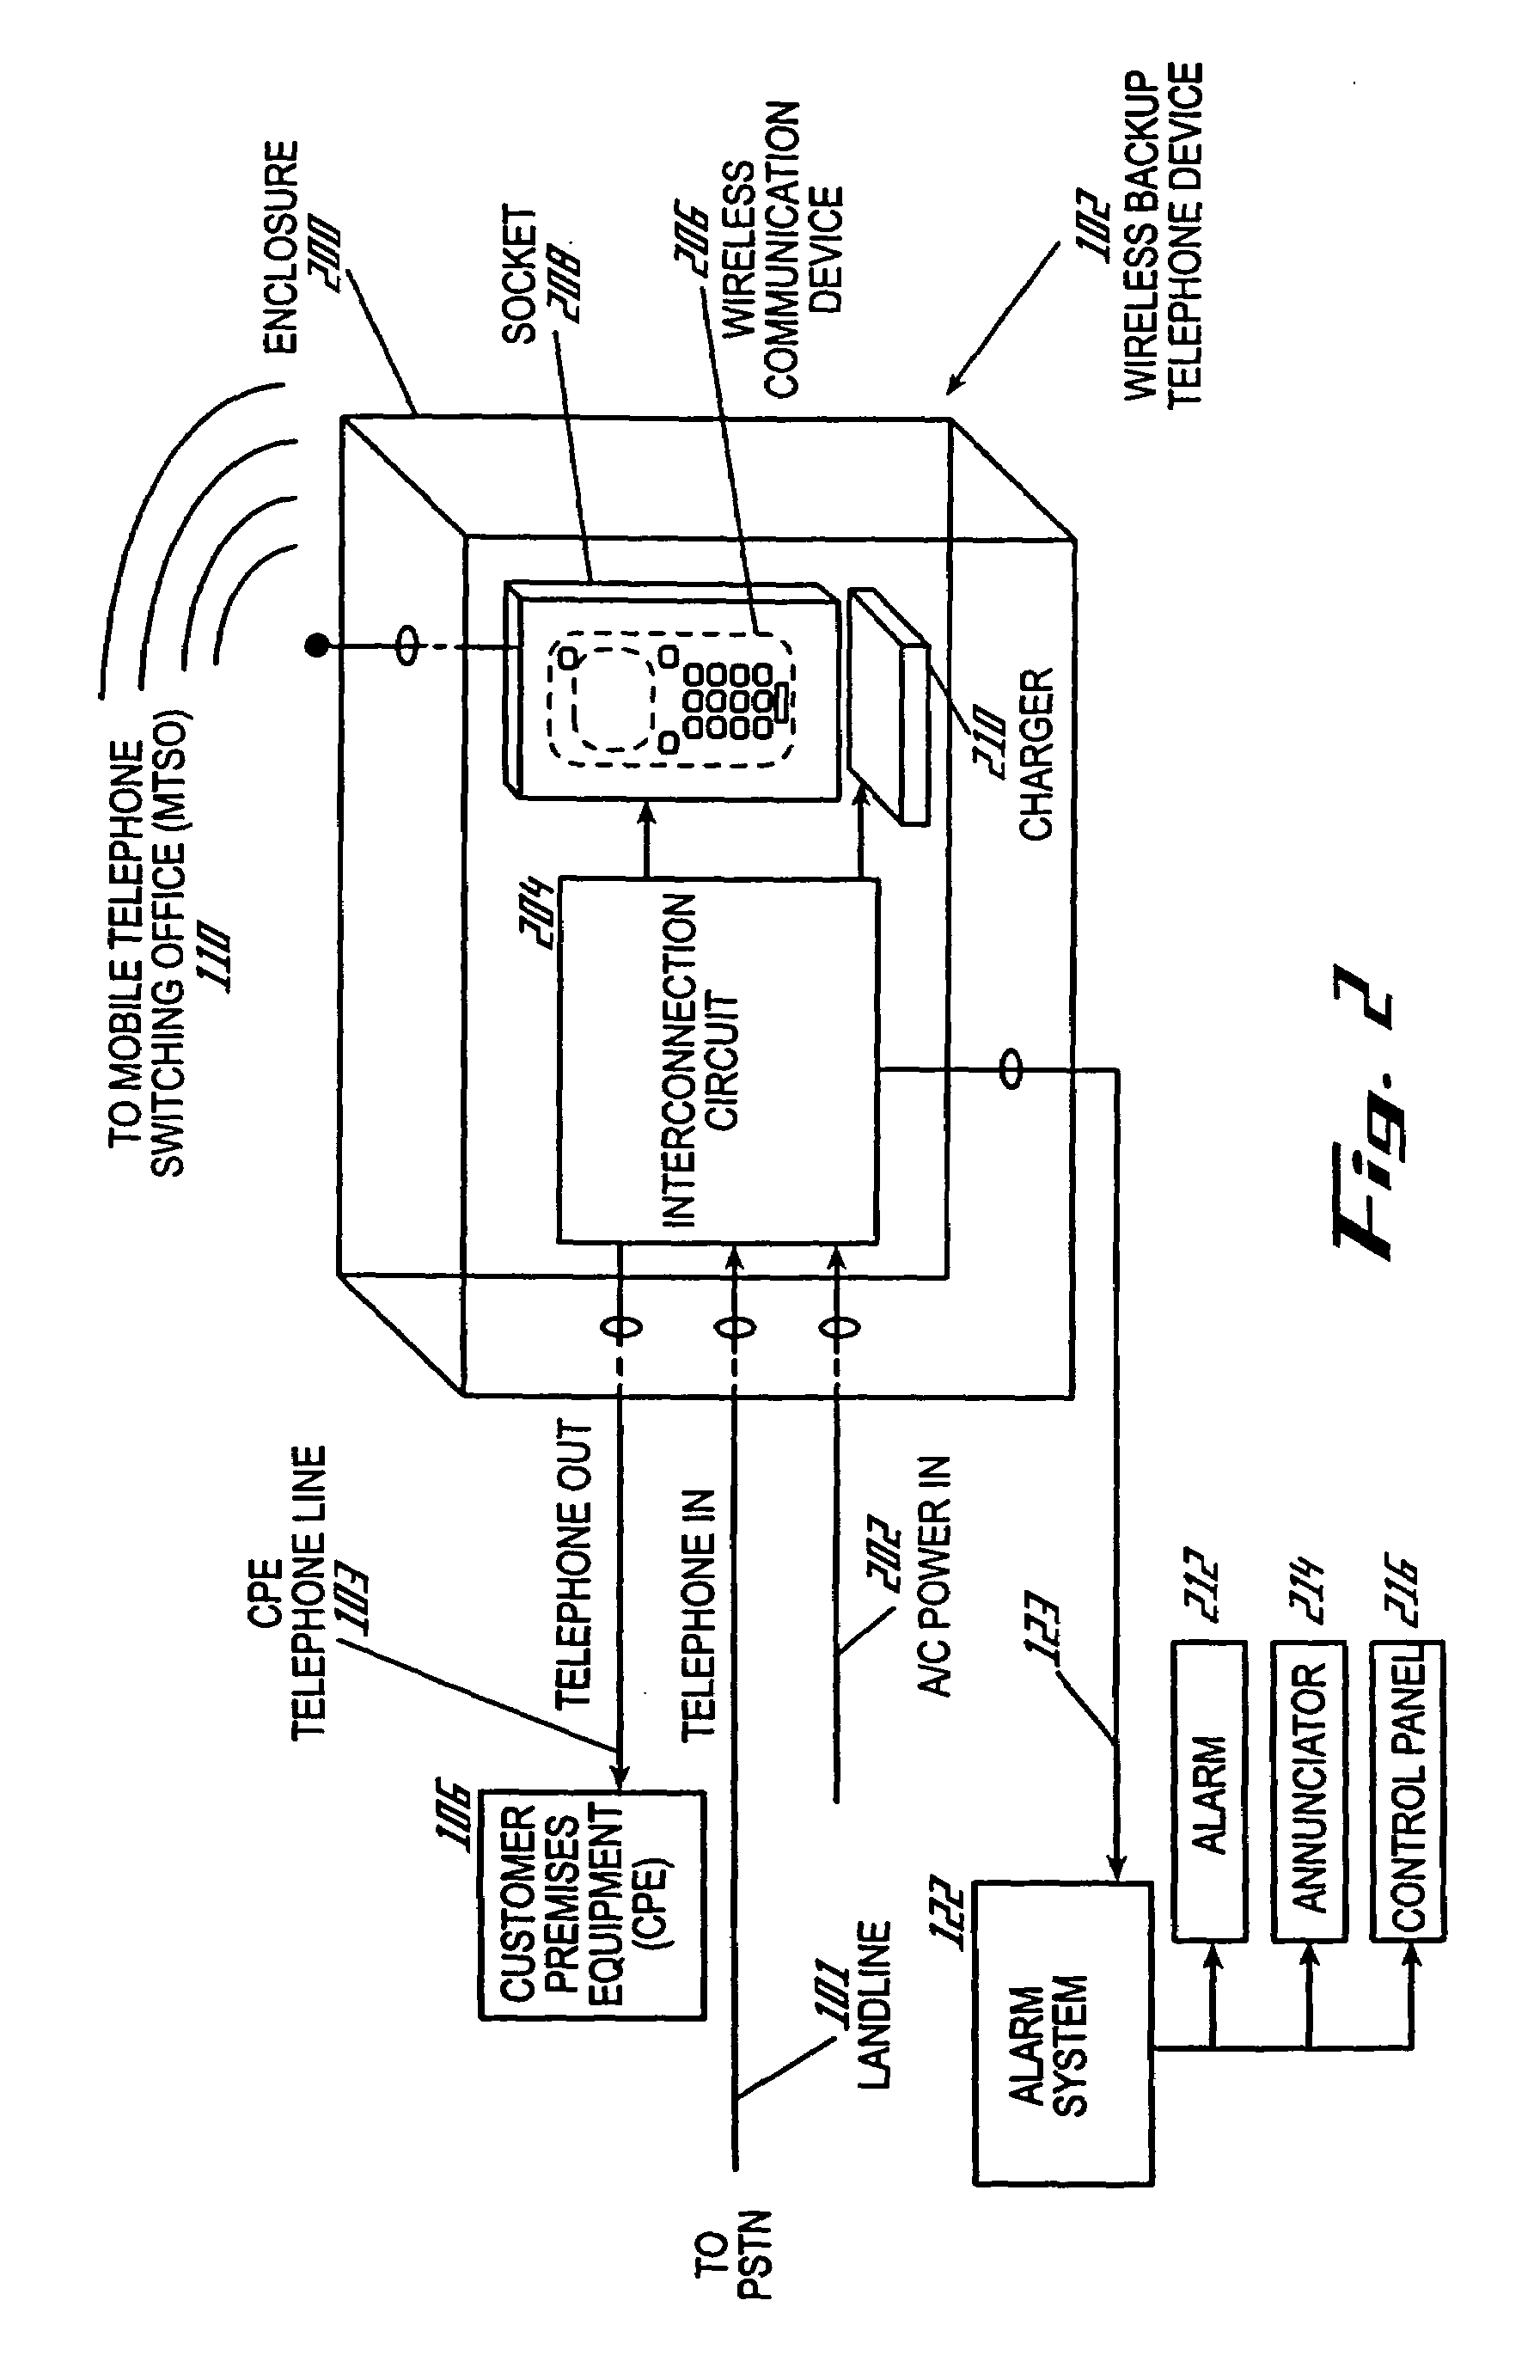 Wireless backup telephone device and associated support system